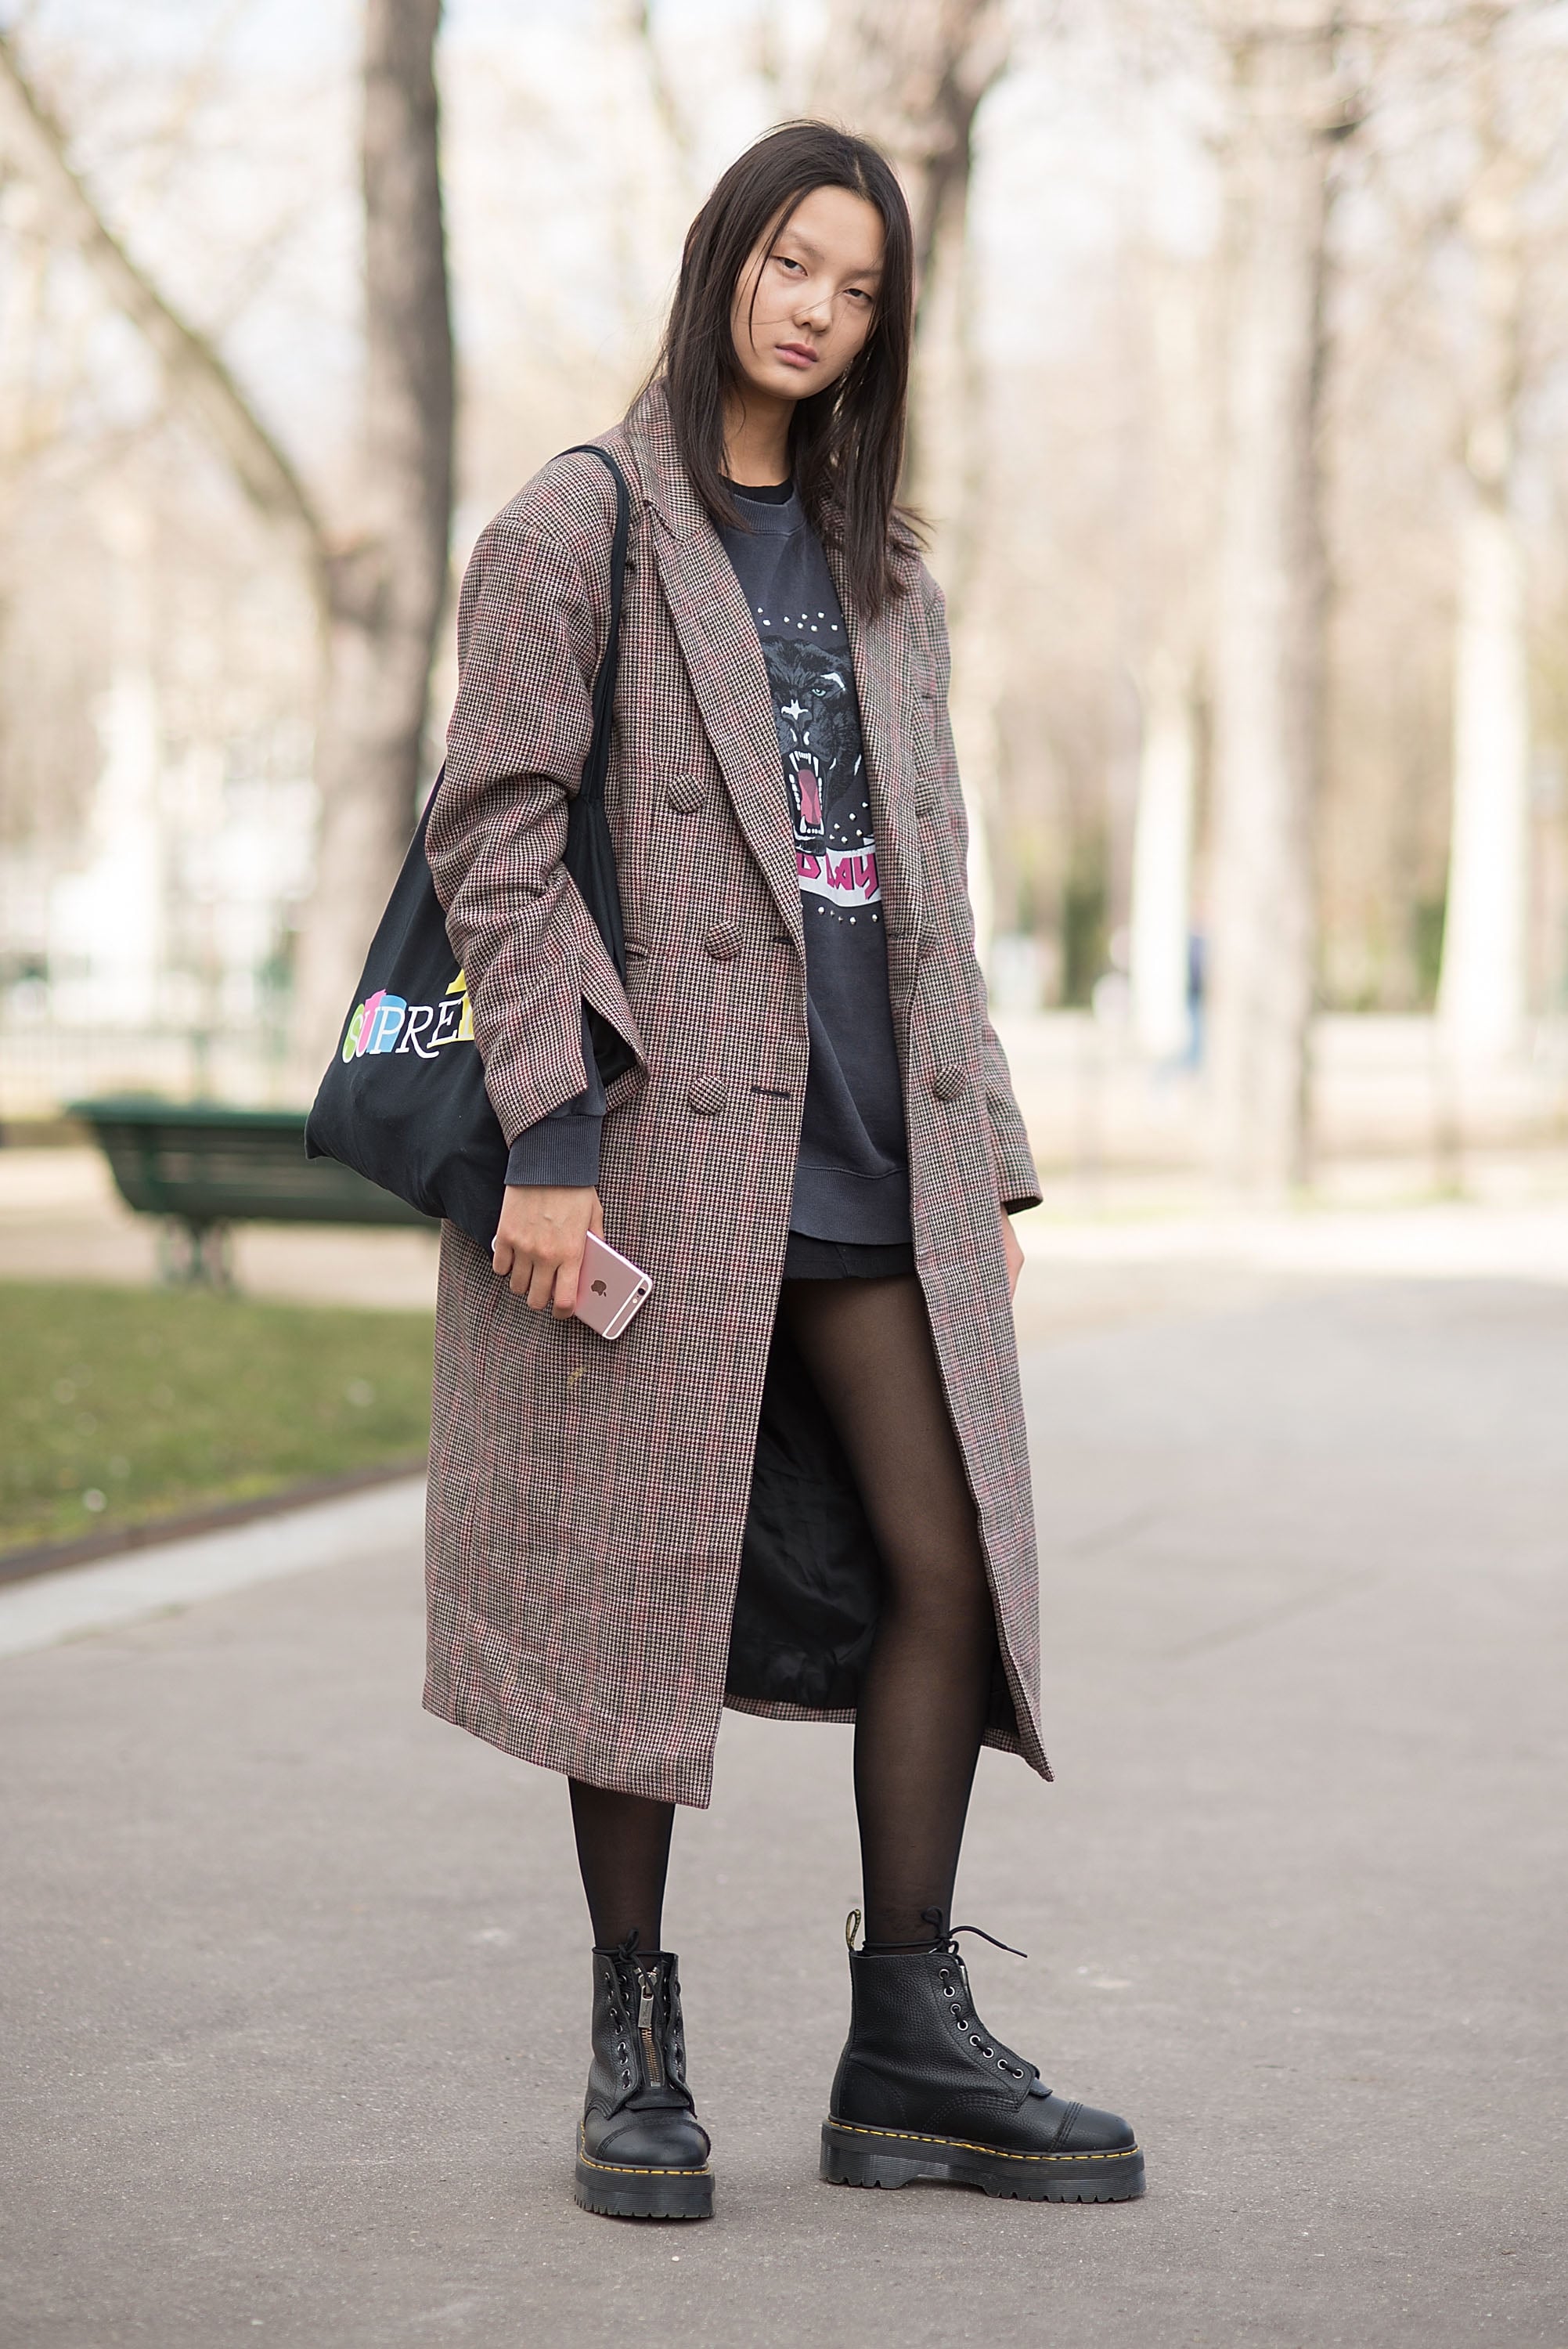 Style Them With Sheer Tights, a Checkered Coat, and an Oversize